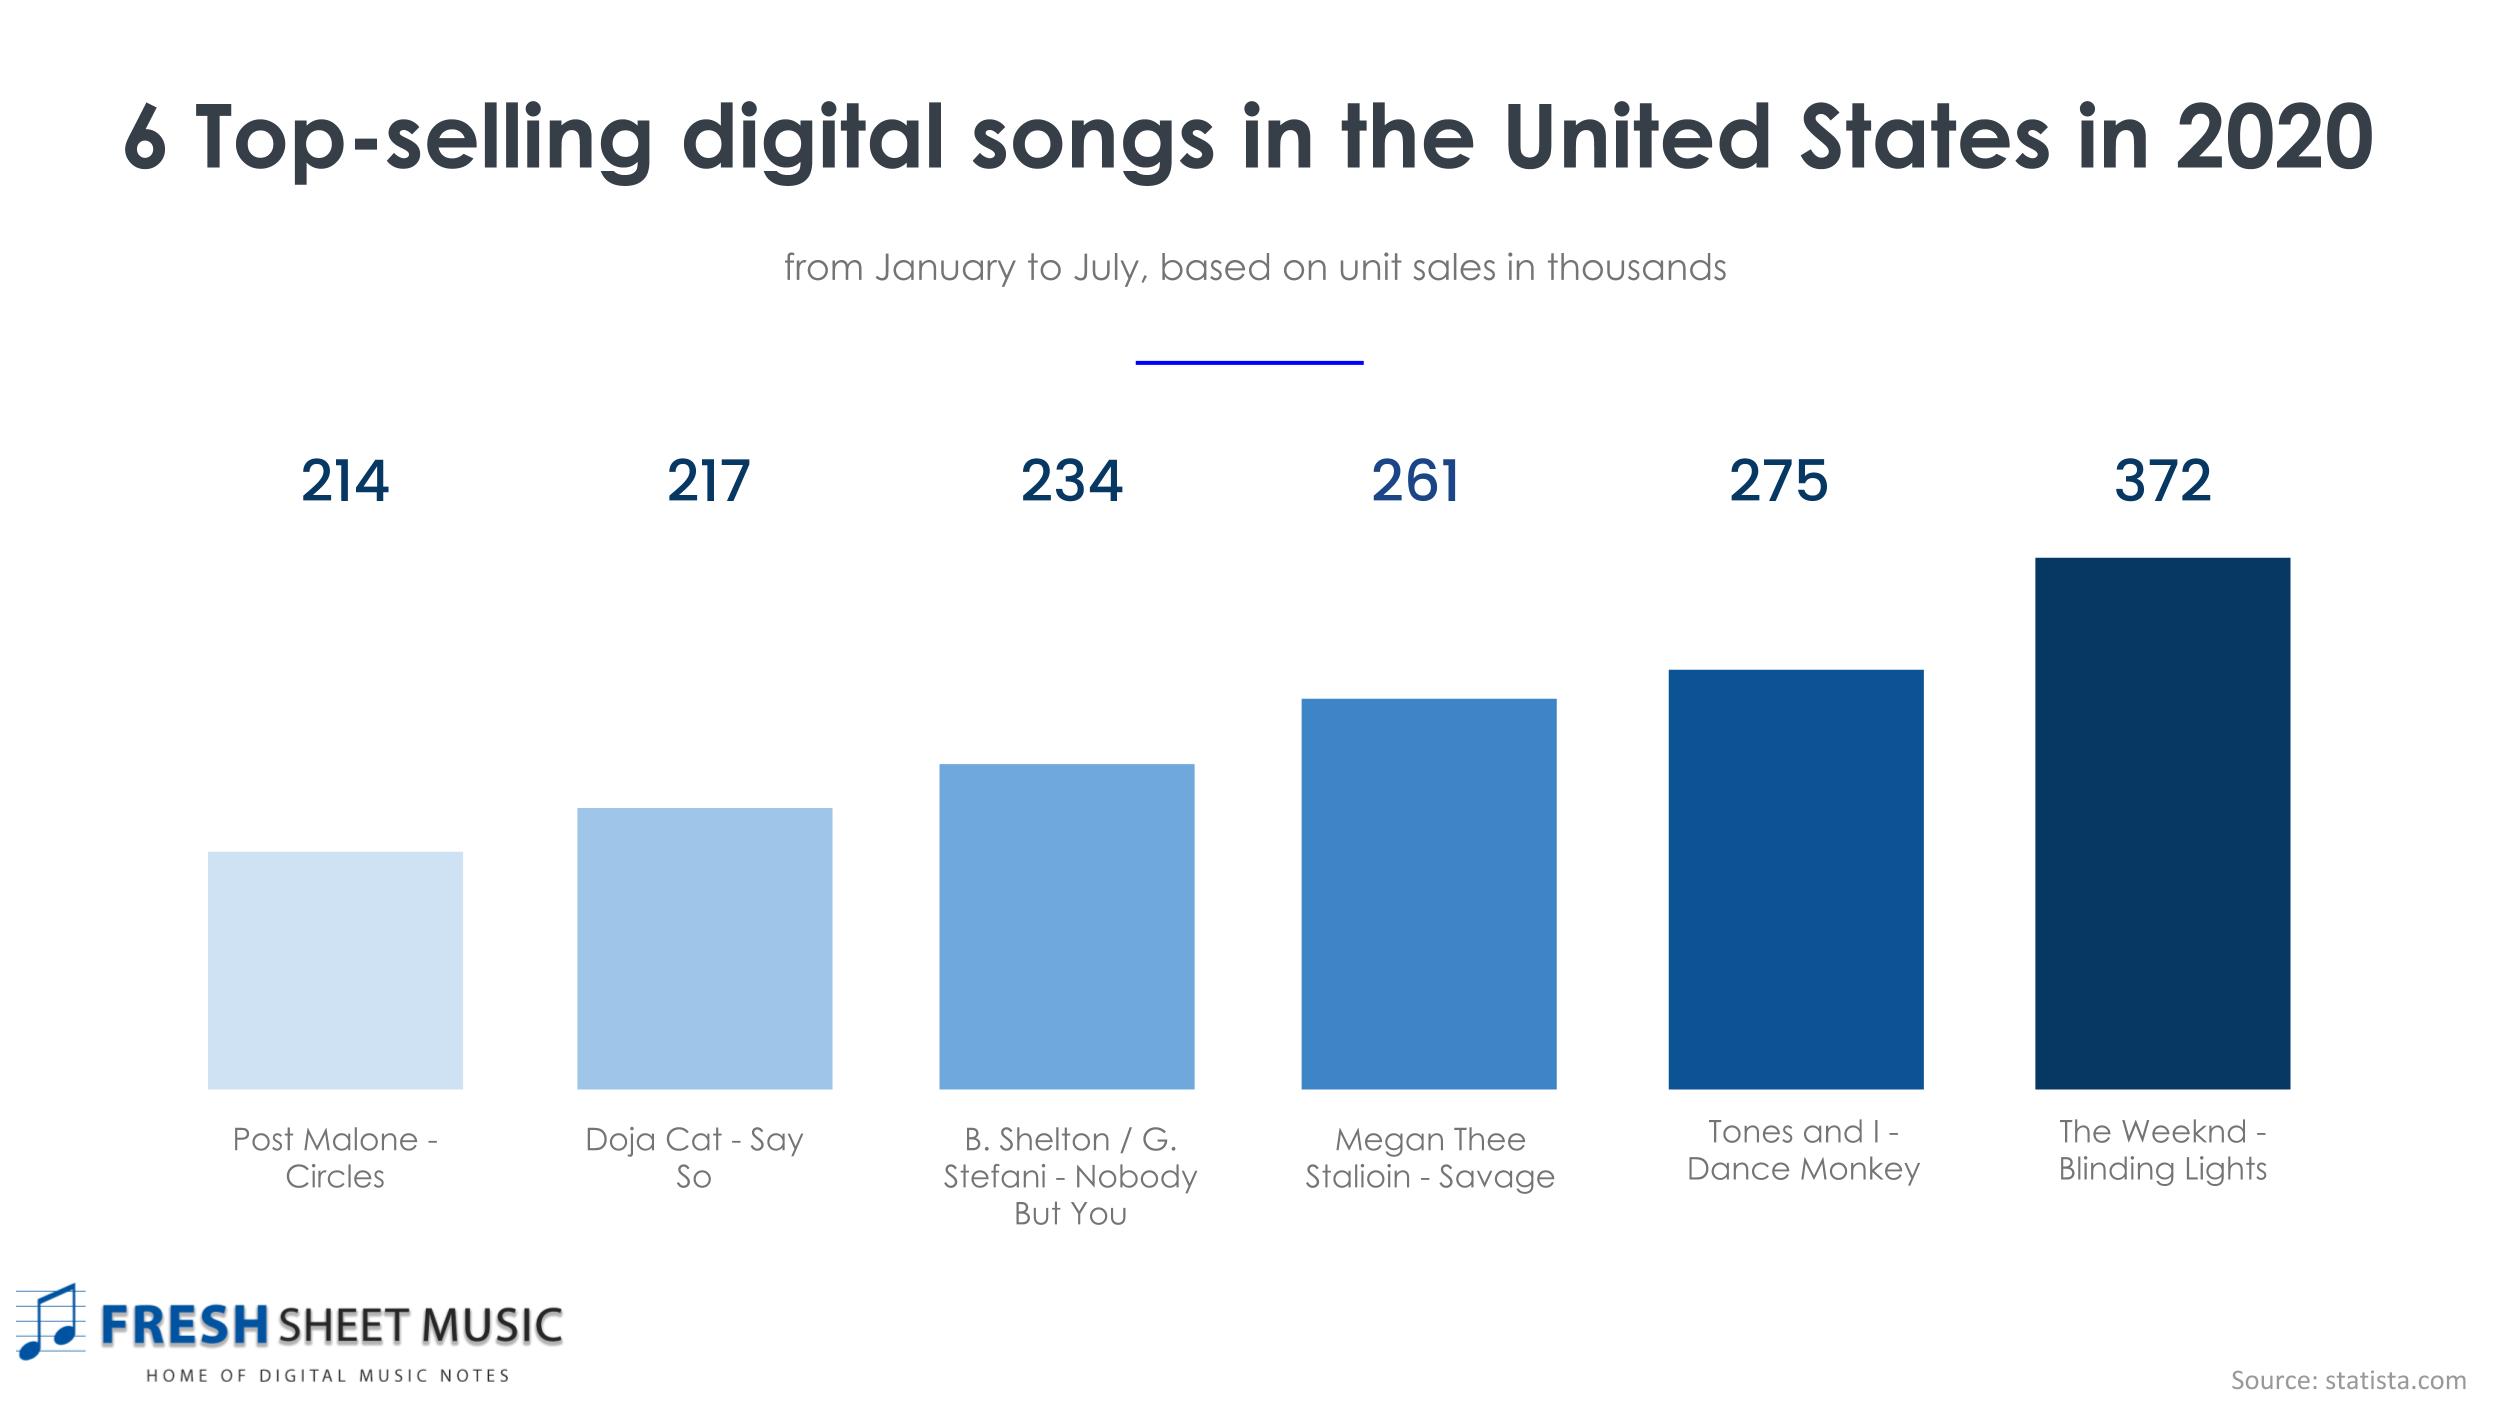 Six Top-Selling Digital Songs in the United States in 2020